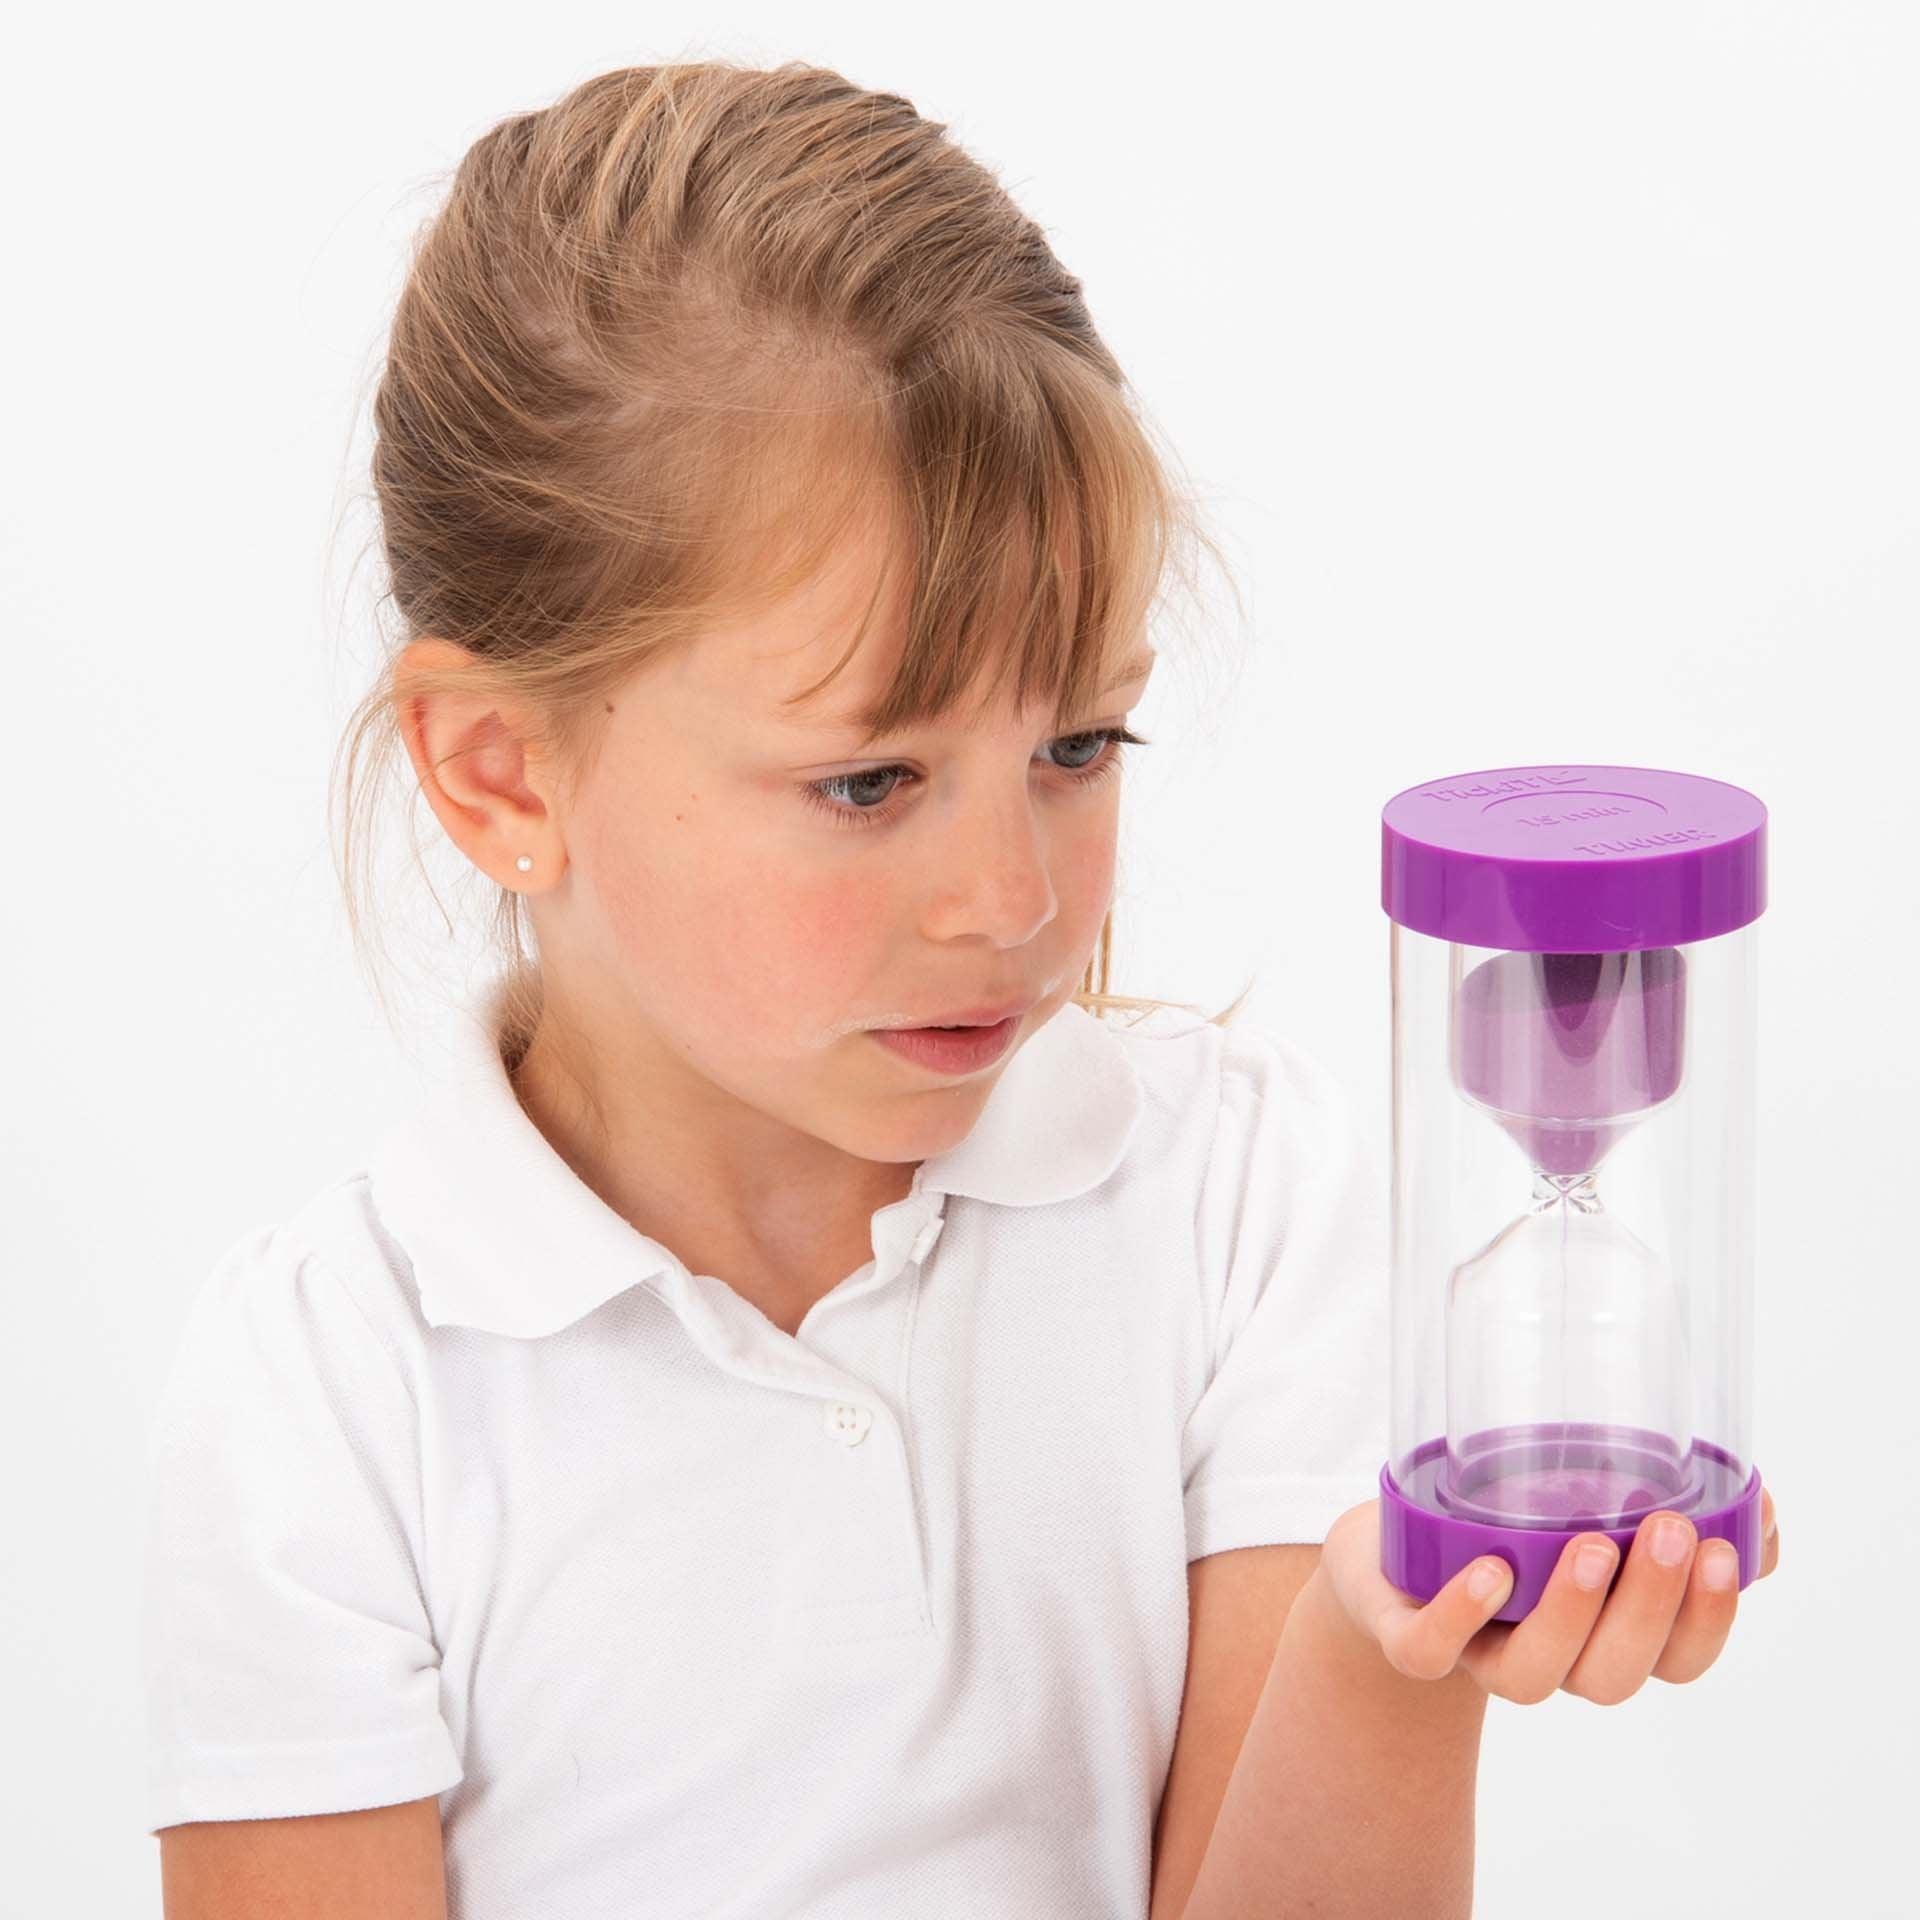 TickiT Colour Bright Sand Timer 15 Minute, Our new TickiT ColourBright Sand Timer 15 Minute timer is a robust sand timers offer the same traditional visual demonstration of the passing of time, but with a new rounded design including a shatterproof plastic barrier to protect the sleek modernised glass bulb inside. Easy to understand for young children, ideal for use in timed games or activities and for timing experiments in maths or science. The TickiT ColourBright Sand Timer 15 Minute is colour coded to ma